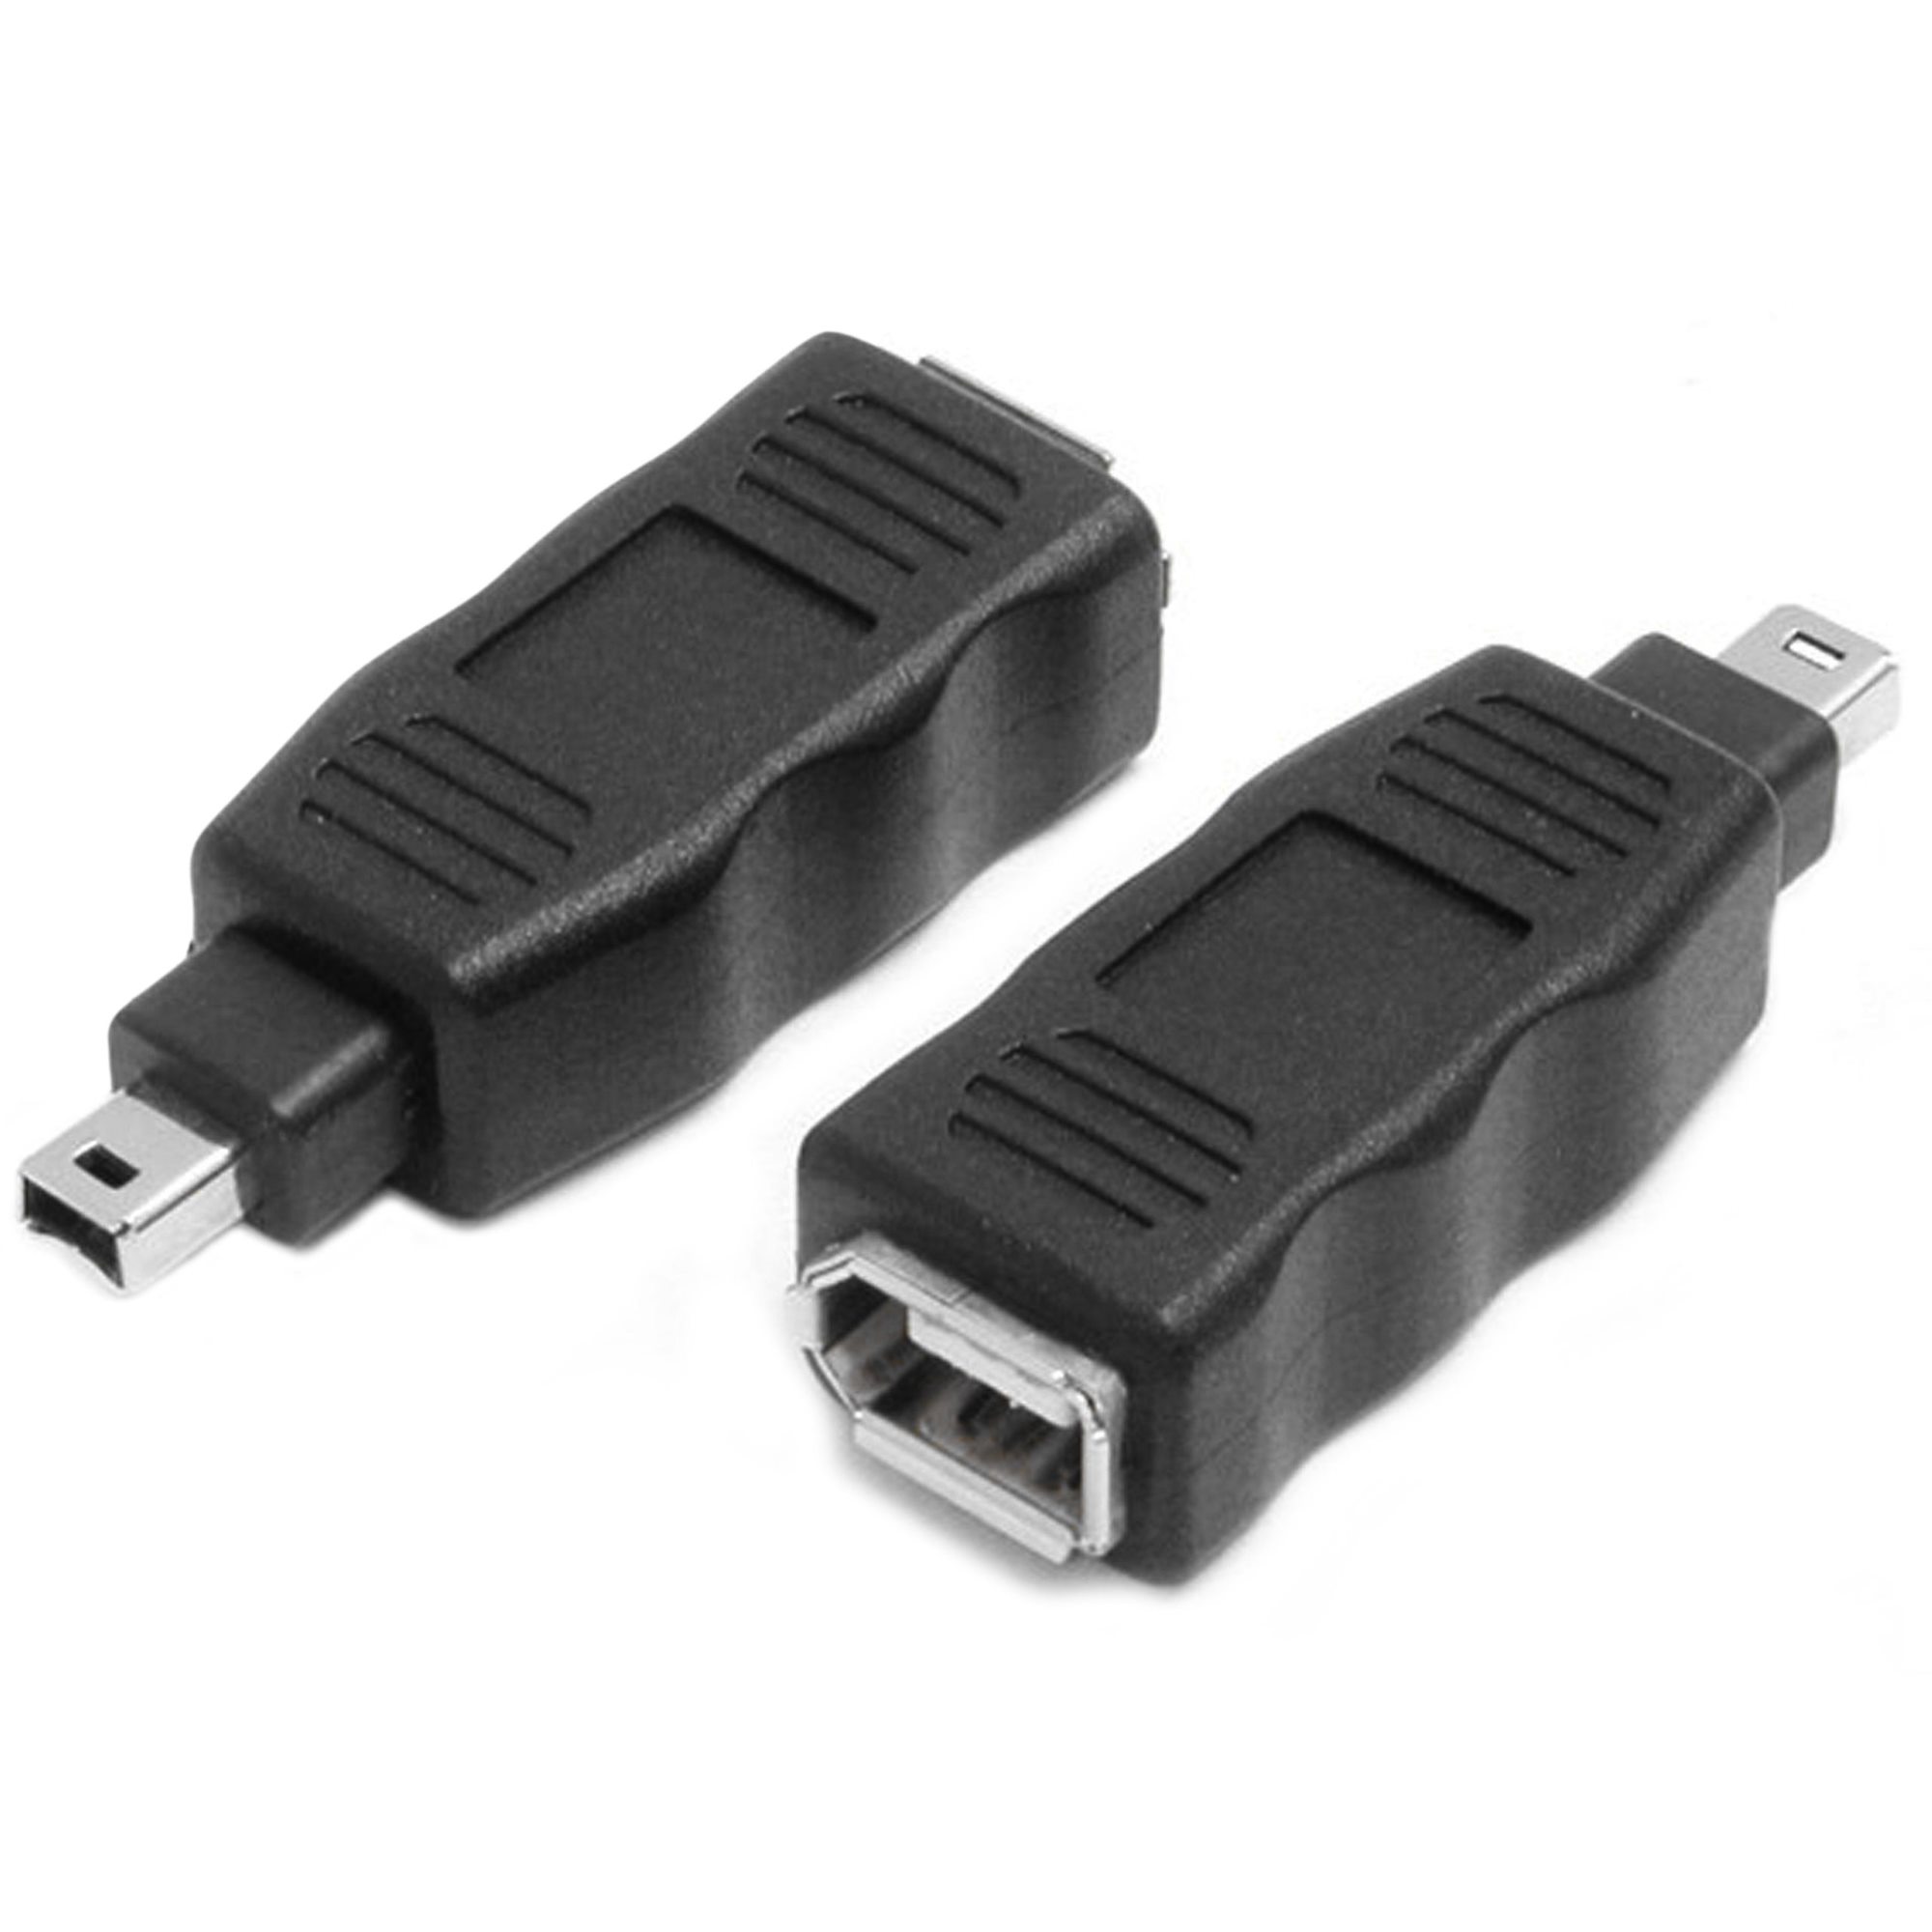 StarTech.com 10 ft IEEE-1394 FireWire Cable 6-6 M/M 